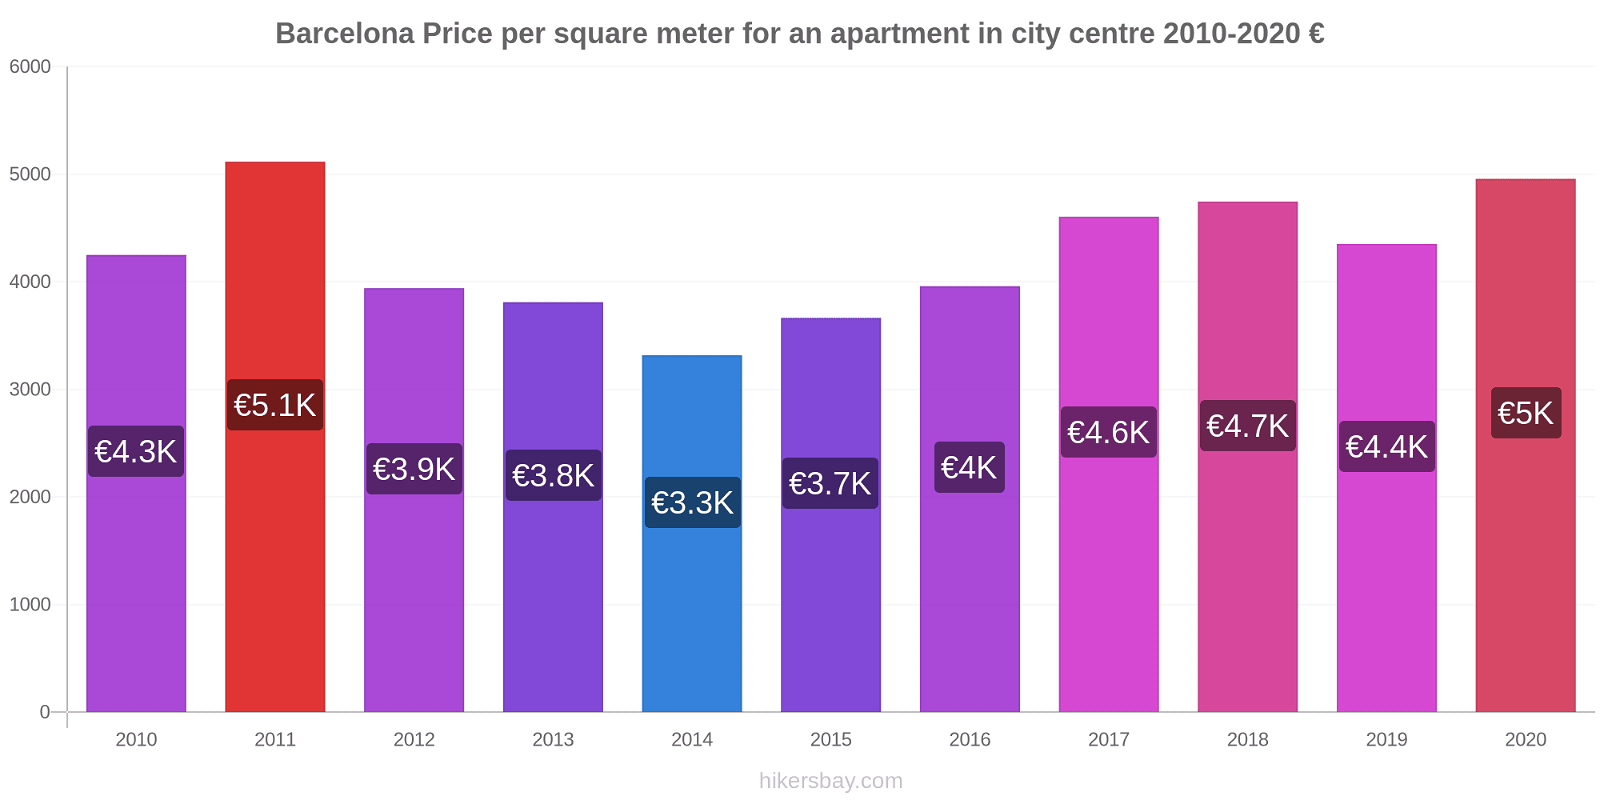 Barcelona price changes Price per square meter for an apartment in city centre hikersbay.com